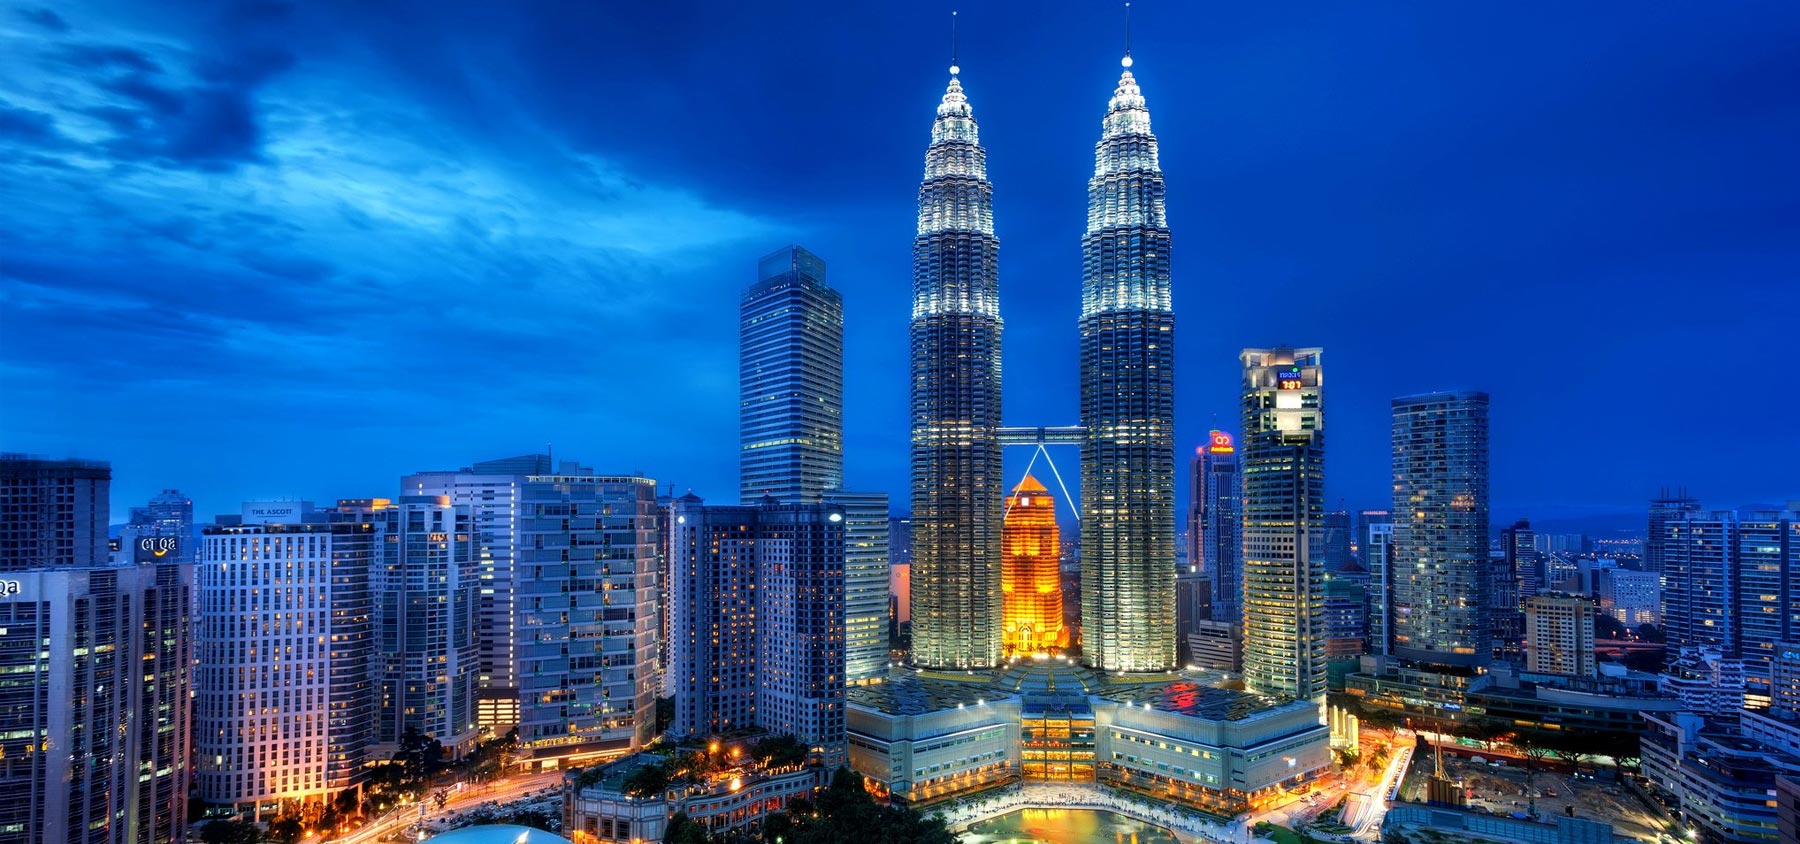 Malaysia Tour Packages, Kuala Lumpur Vacation at low Price - TripDezire